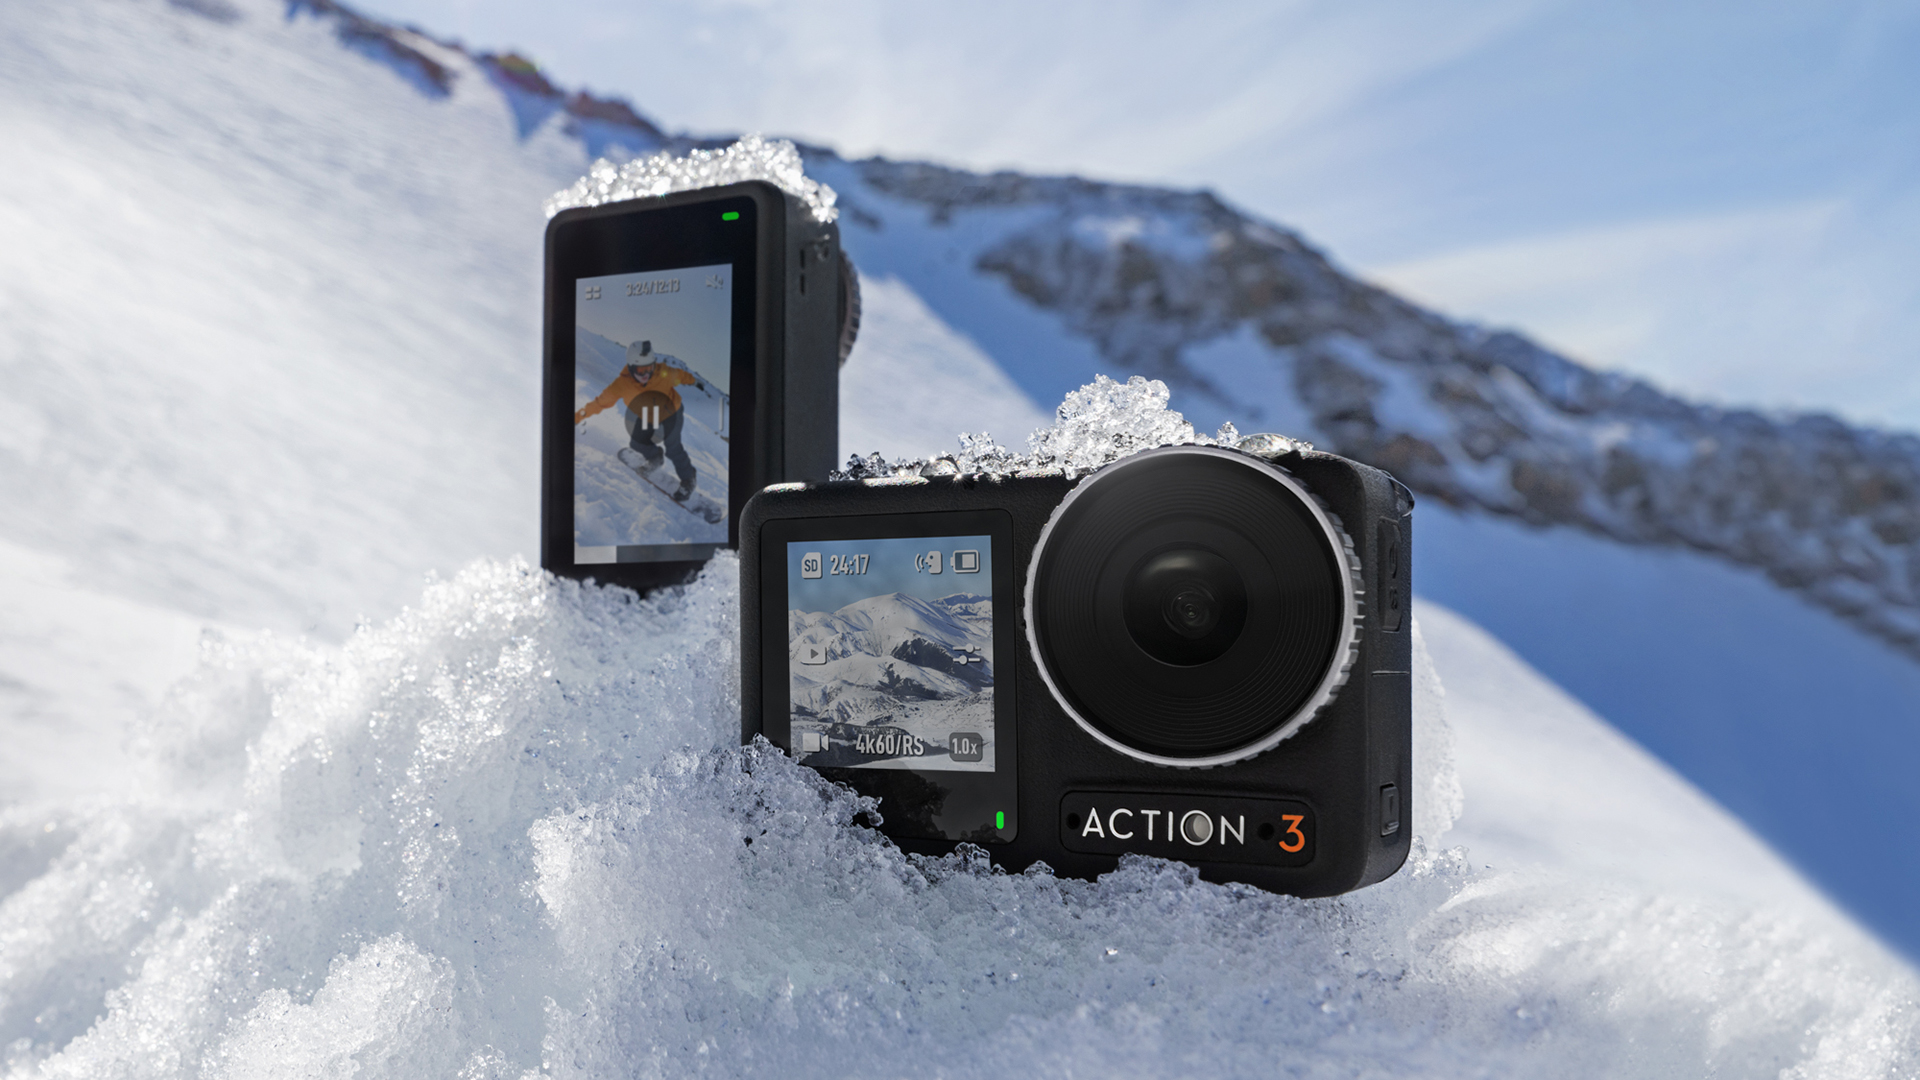 Announcing the DJI Osmo Action 3 Camera